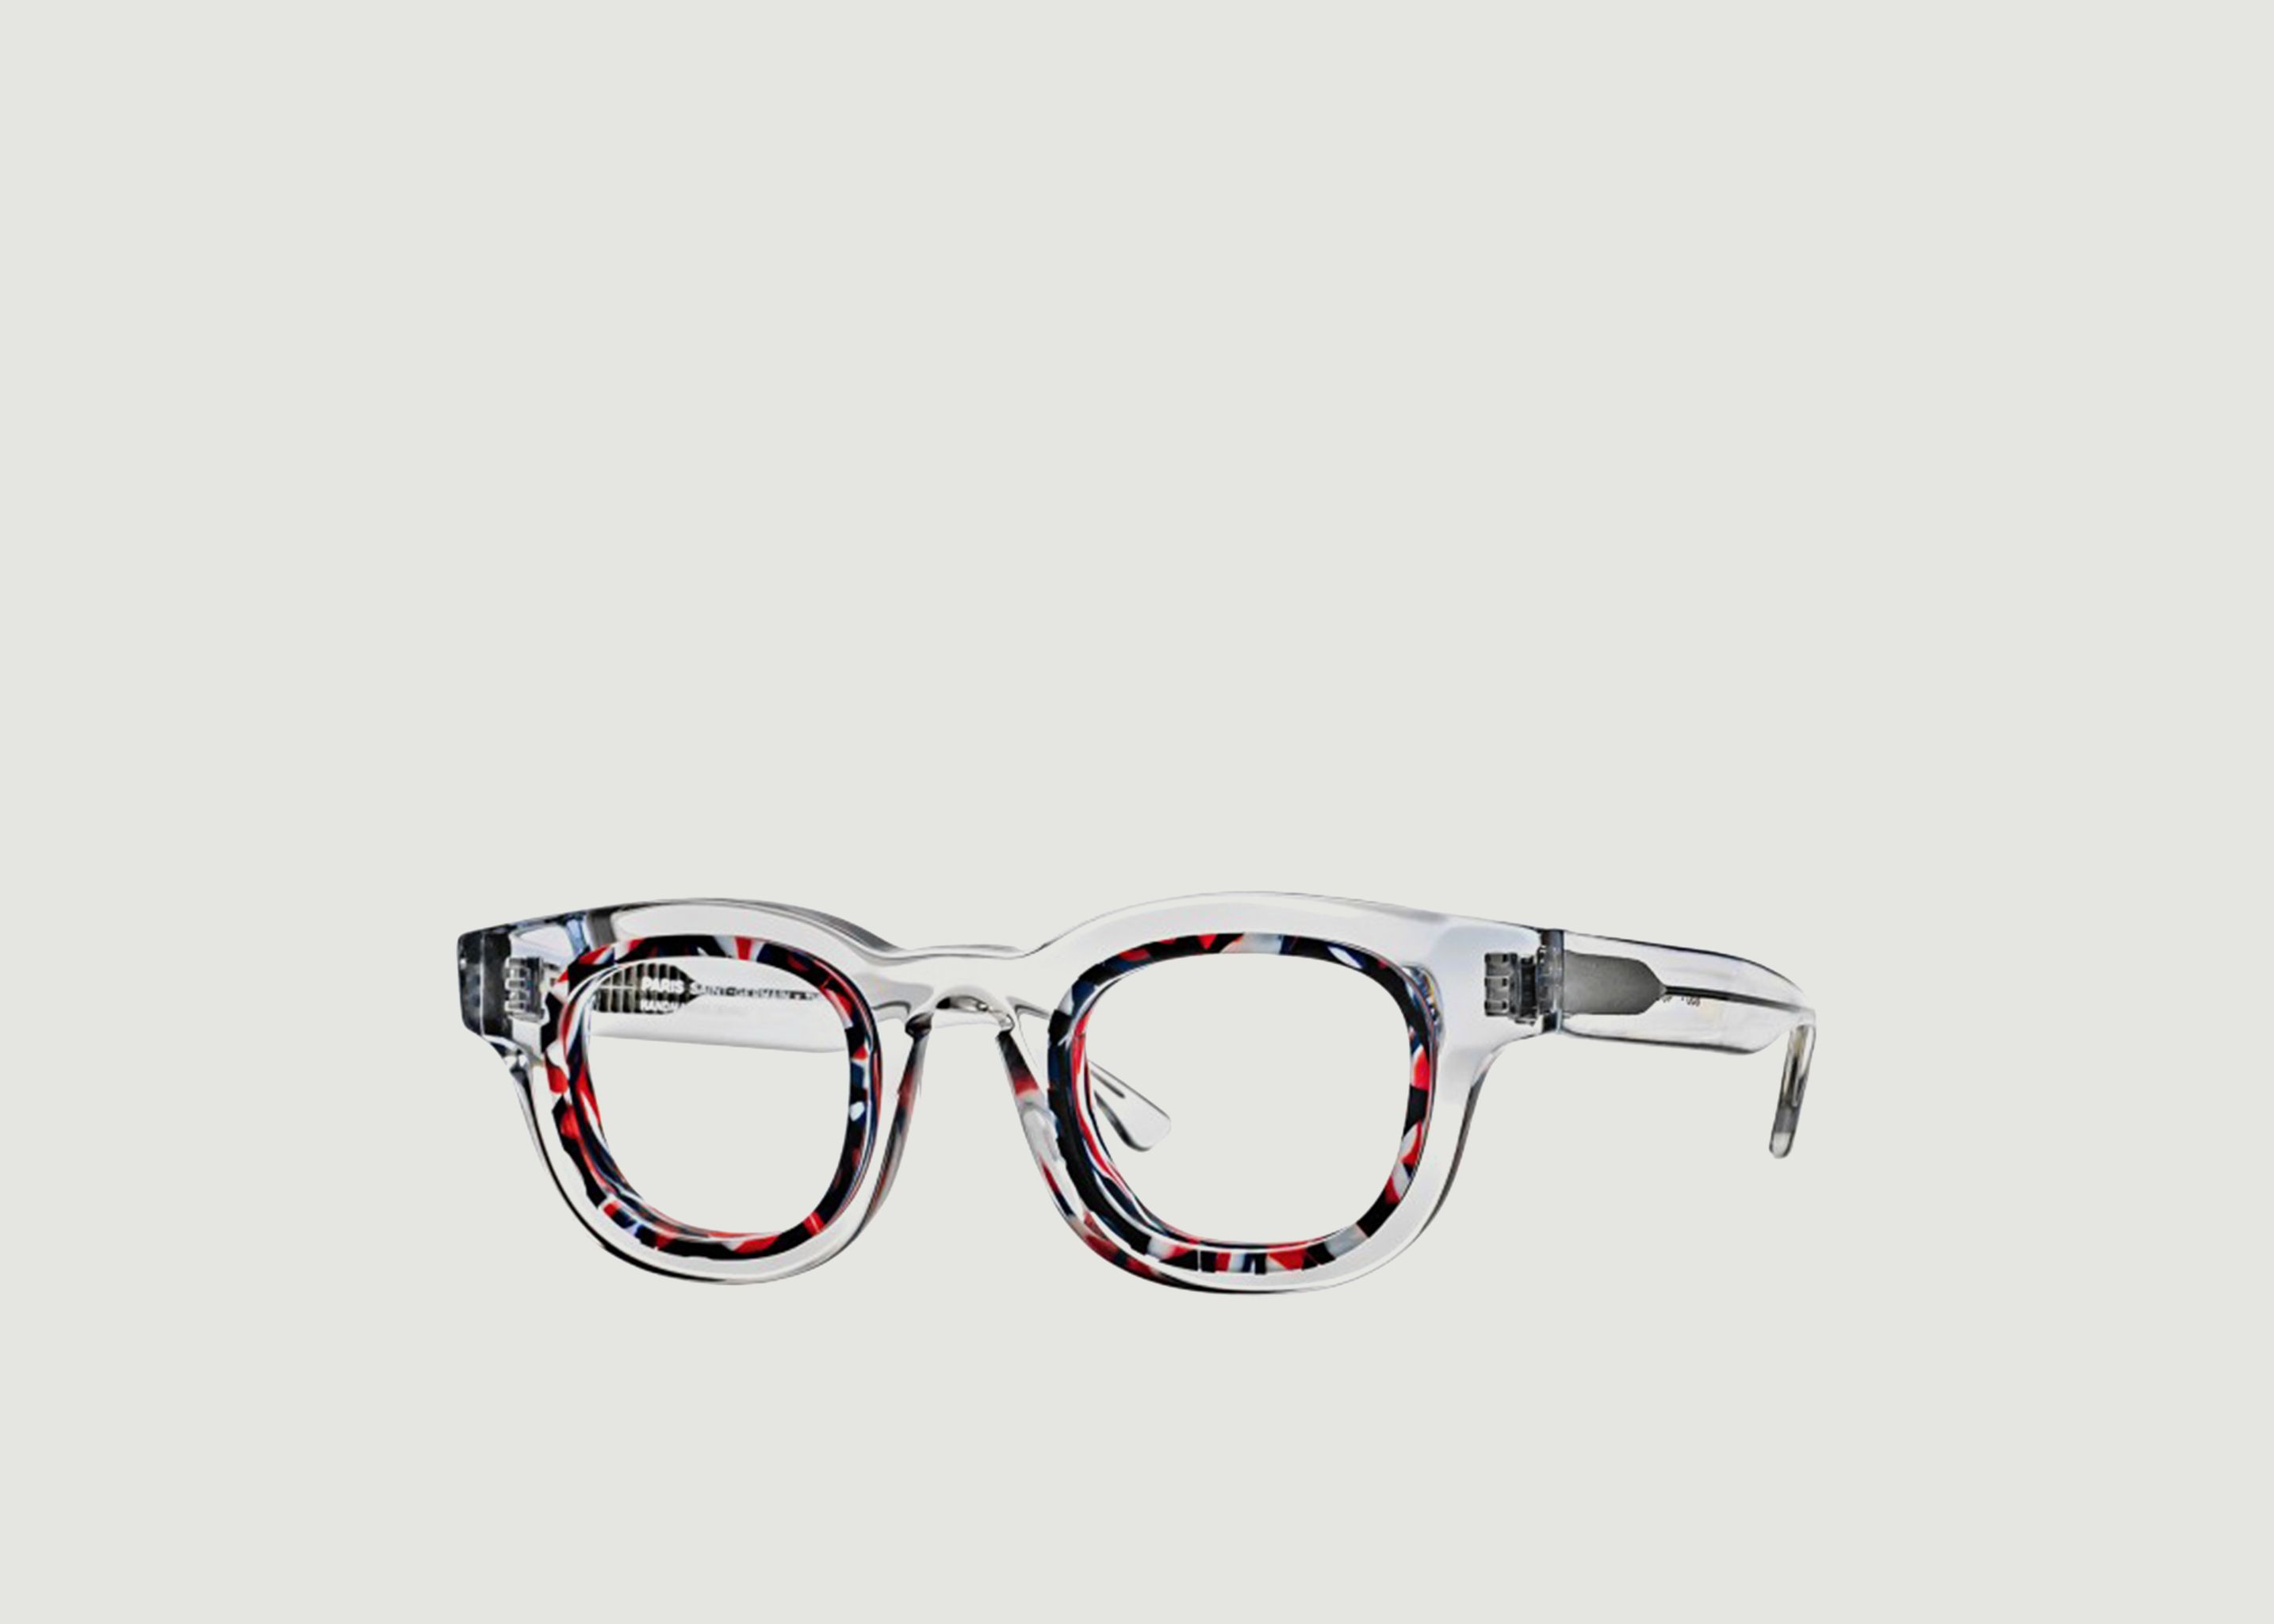 PSG x Thierry Lasry Glasses - Thierry Lasry